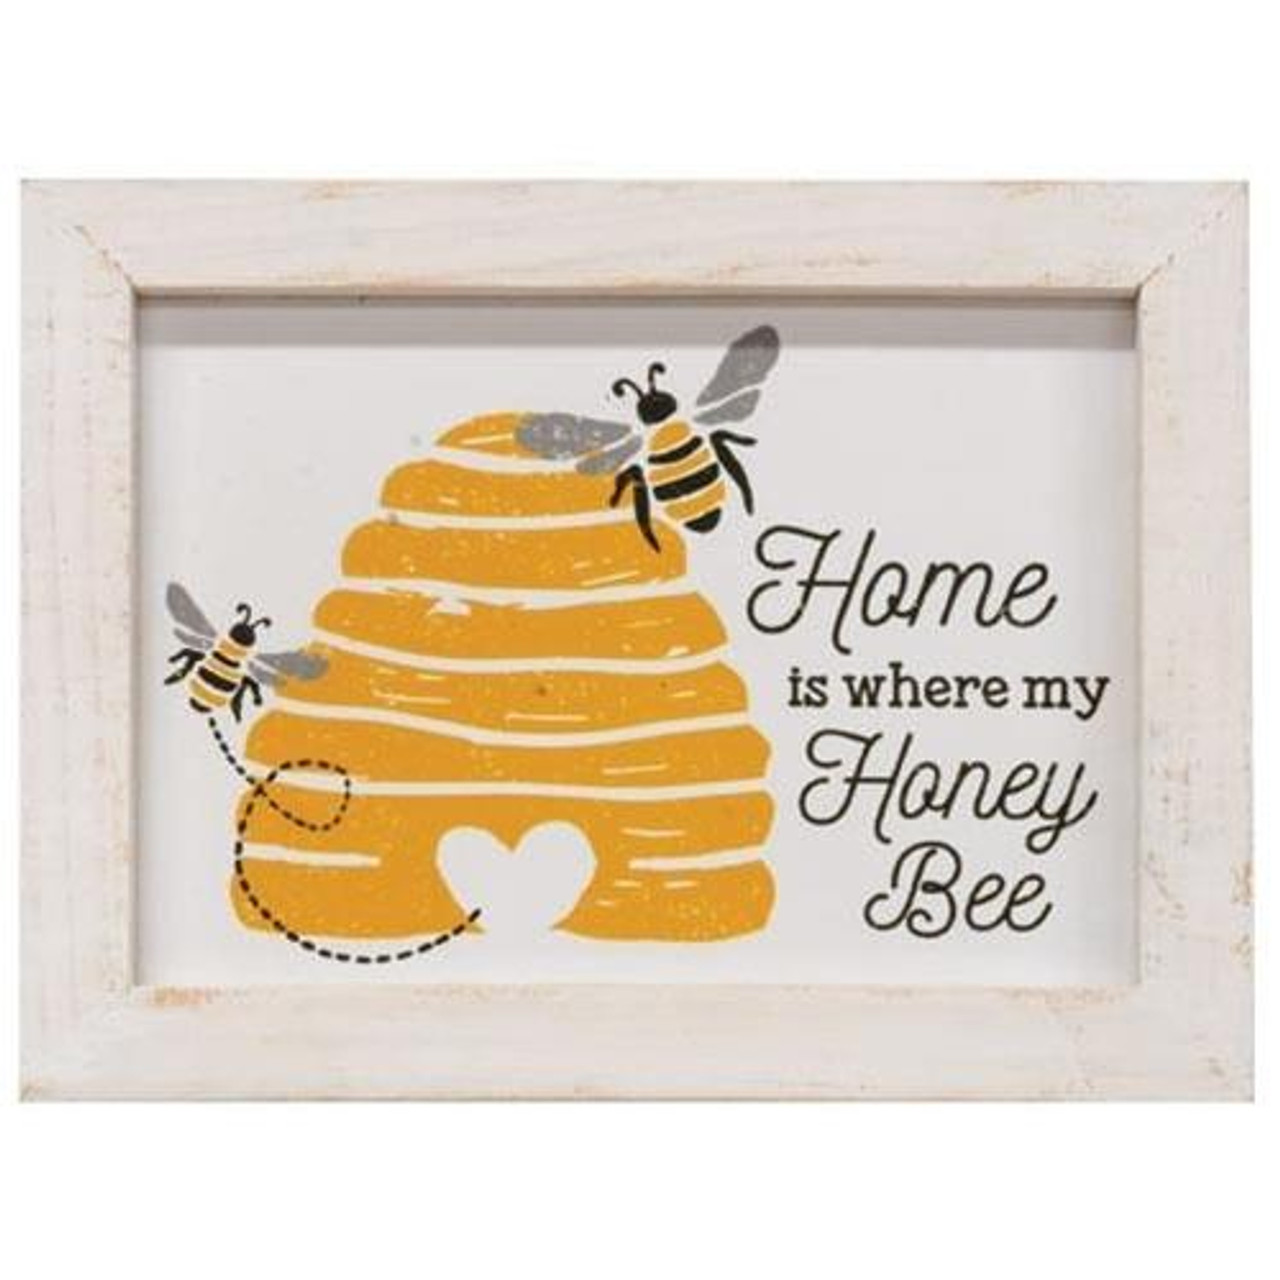 https://cdn11.bigcommerce.com/s-q86nctjasv/images/stencil/1280x1280/products/1874/3877/home-is-where-my-honey-bee-sign-lappesbeesupply__04659.1691027027.jpg?c=1